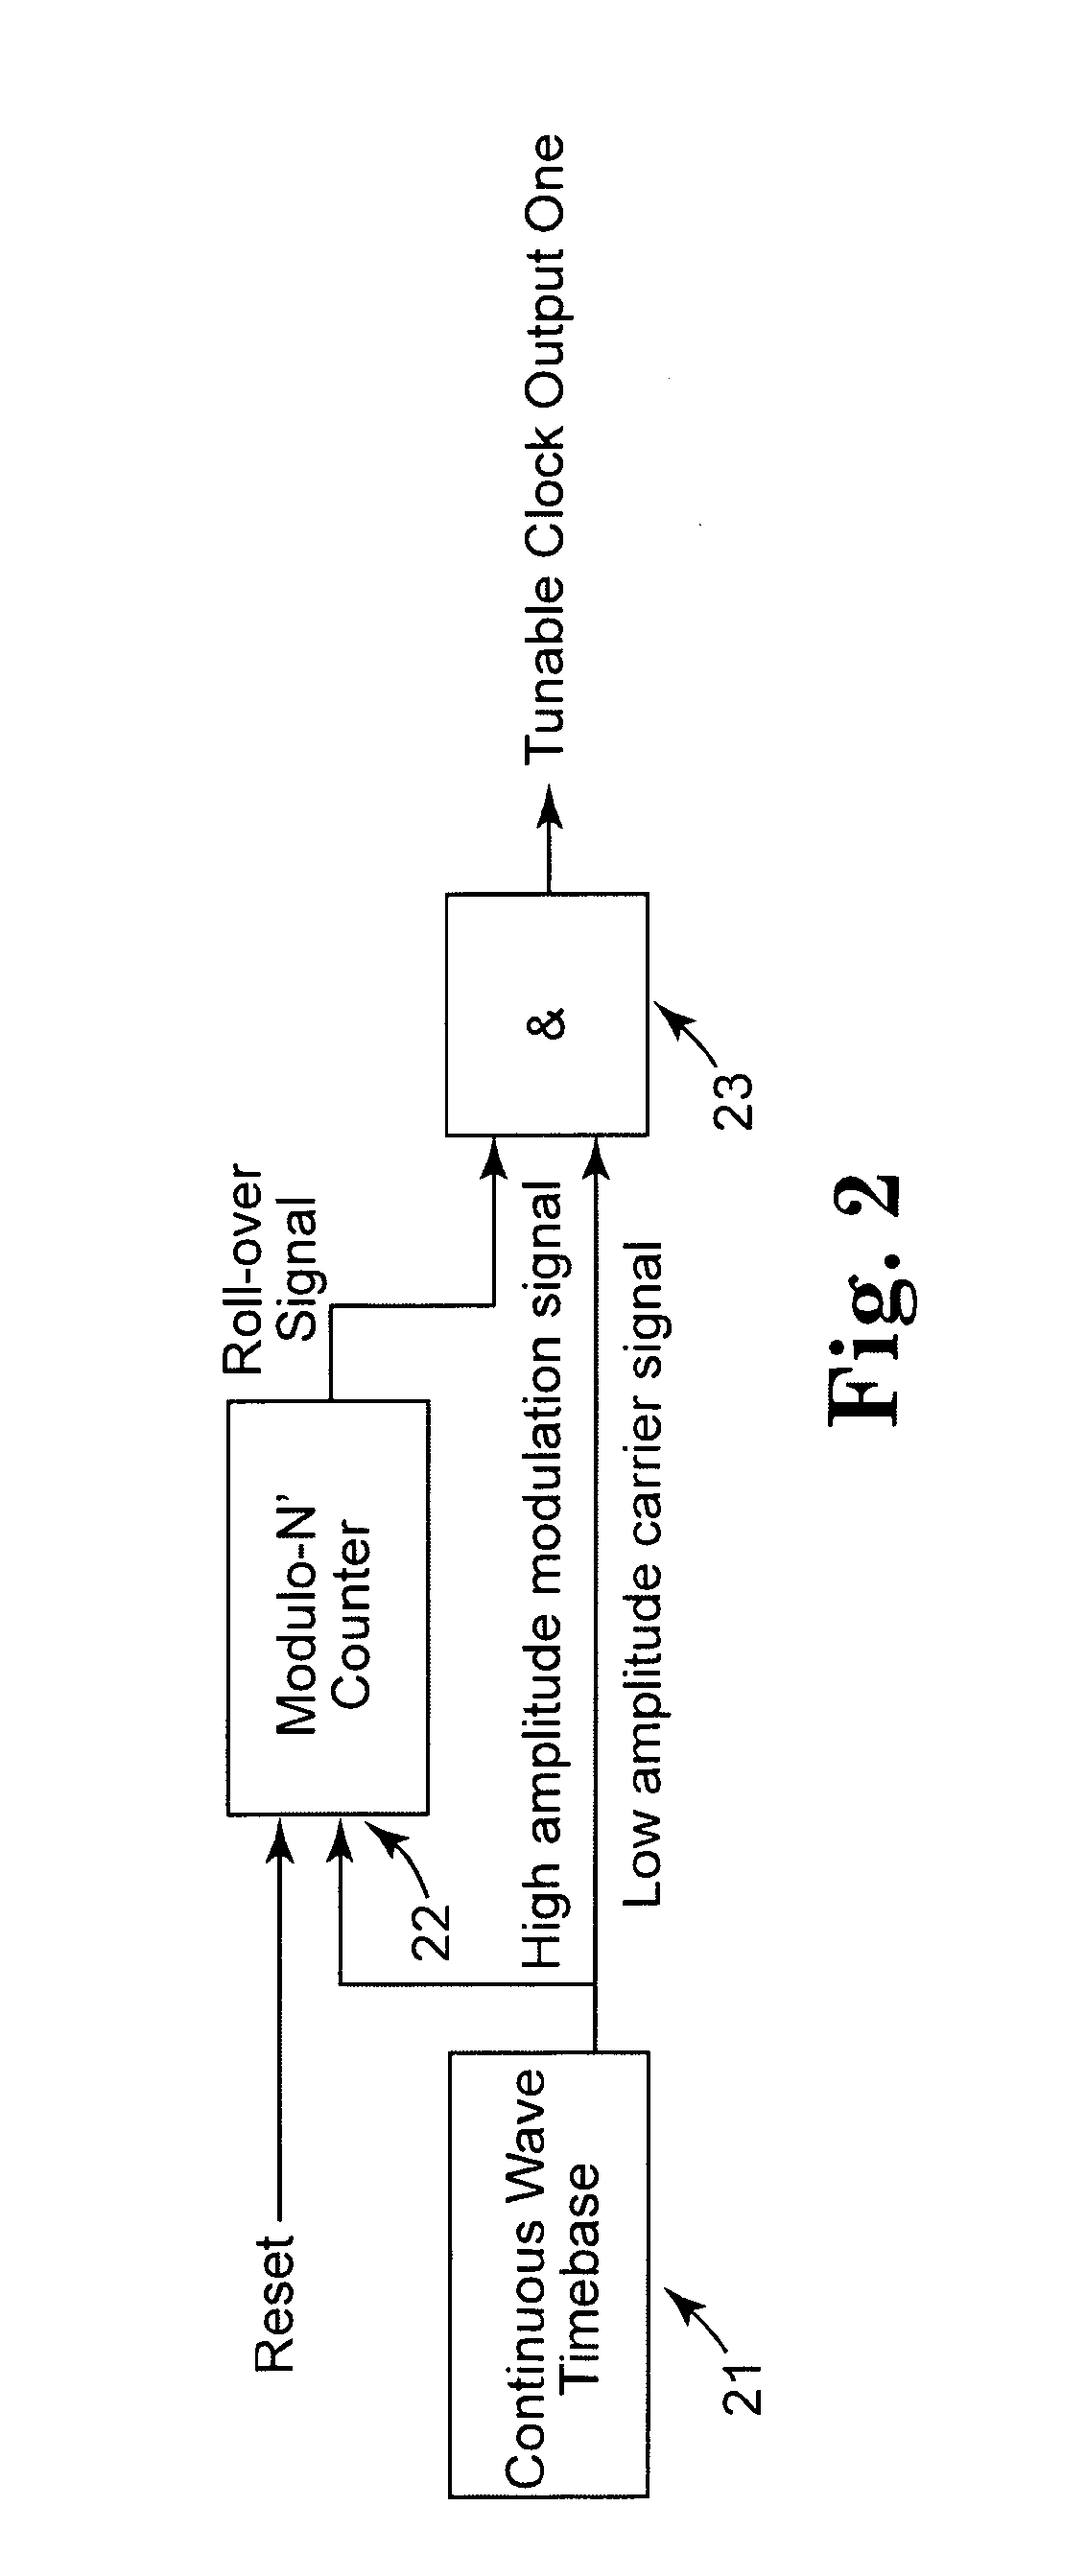 Highly Tunable, Low Jitter Optical Clock Generation